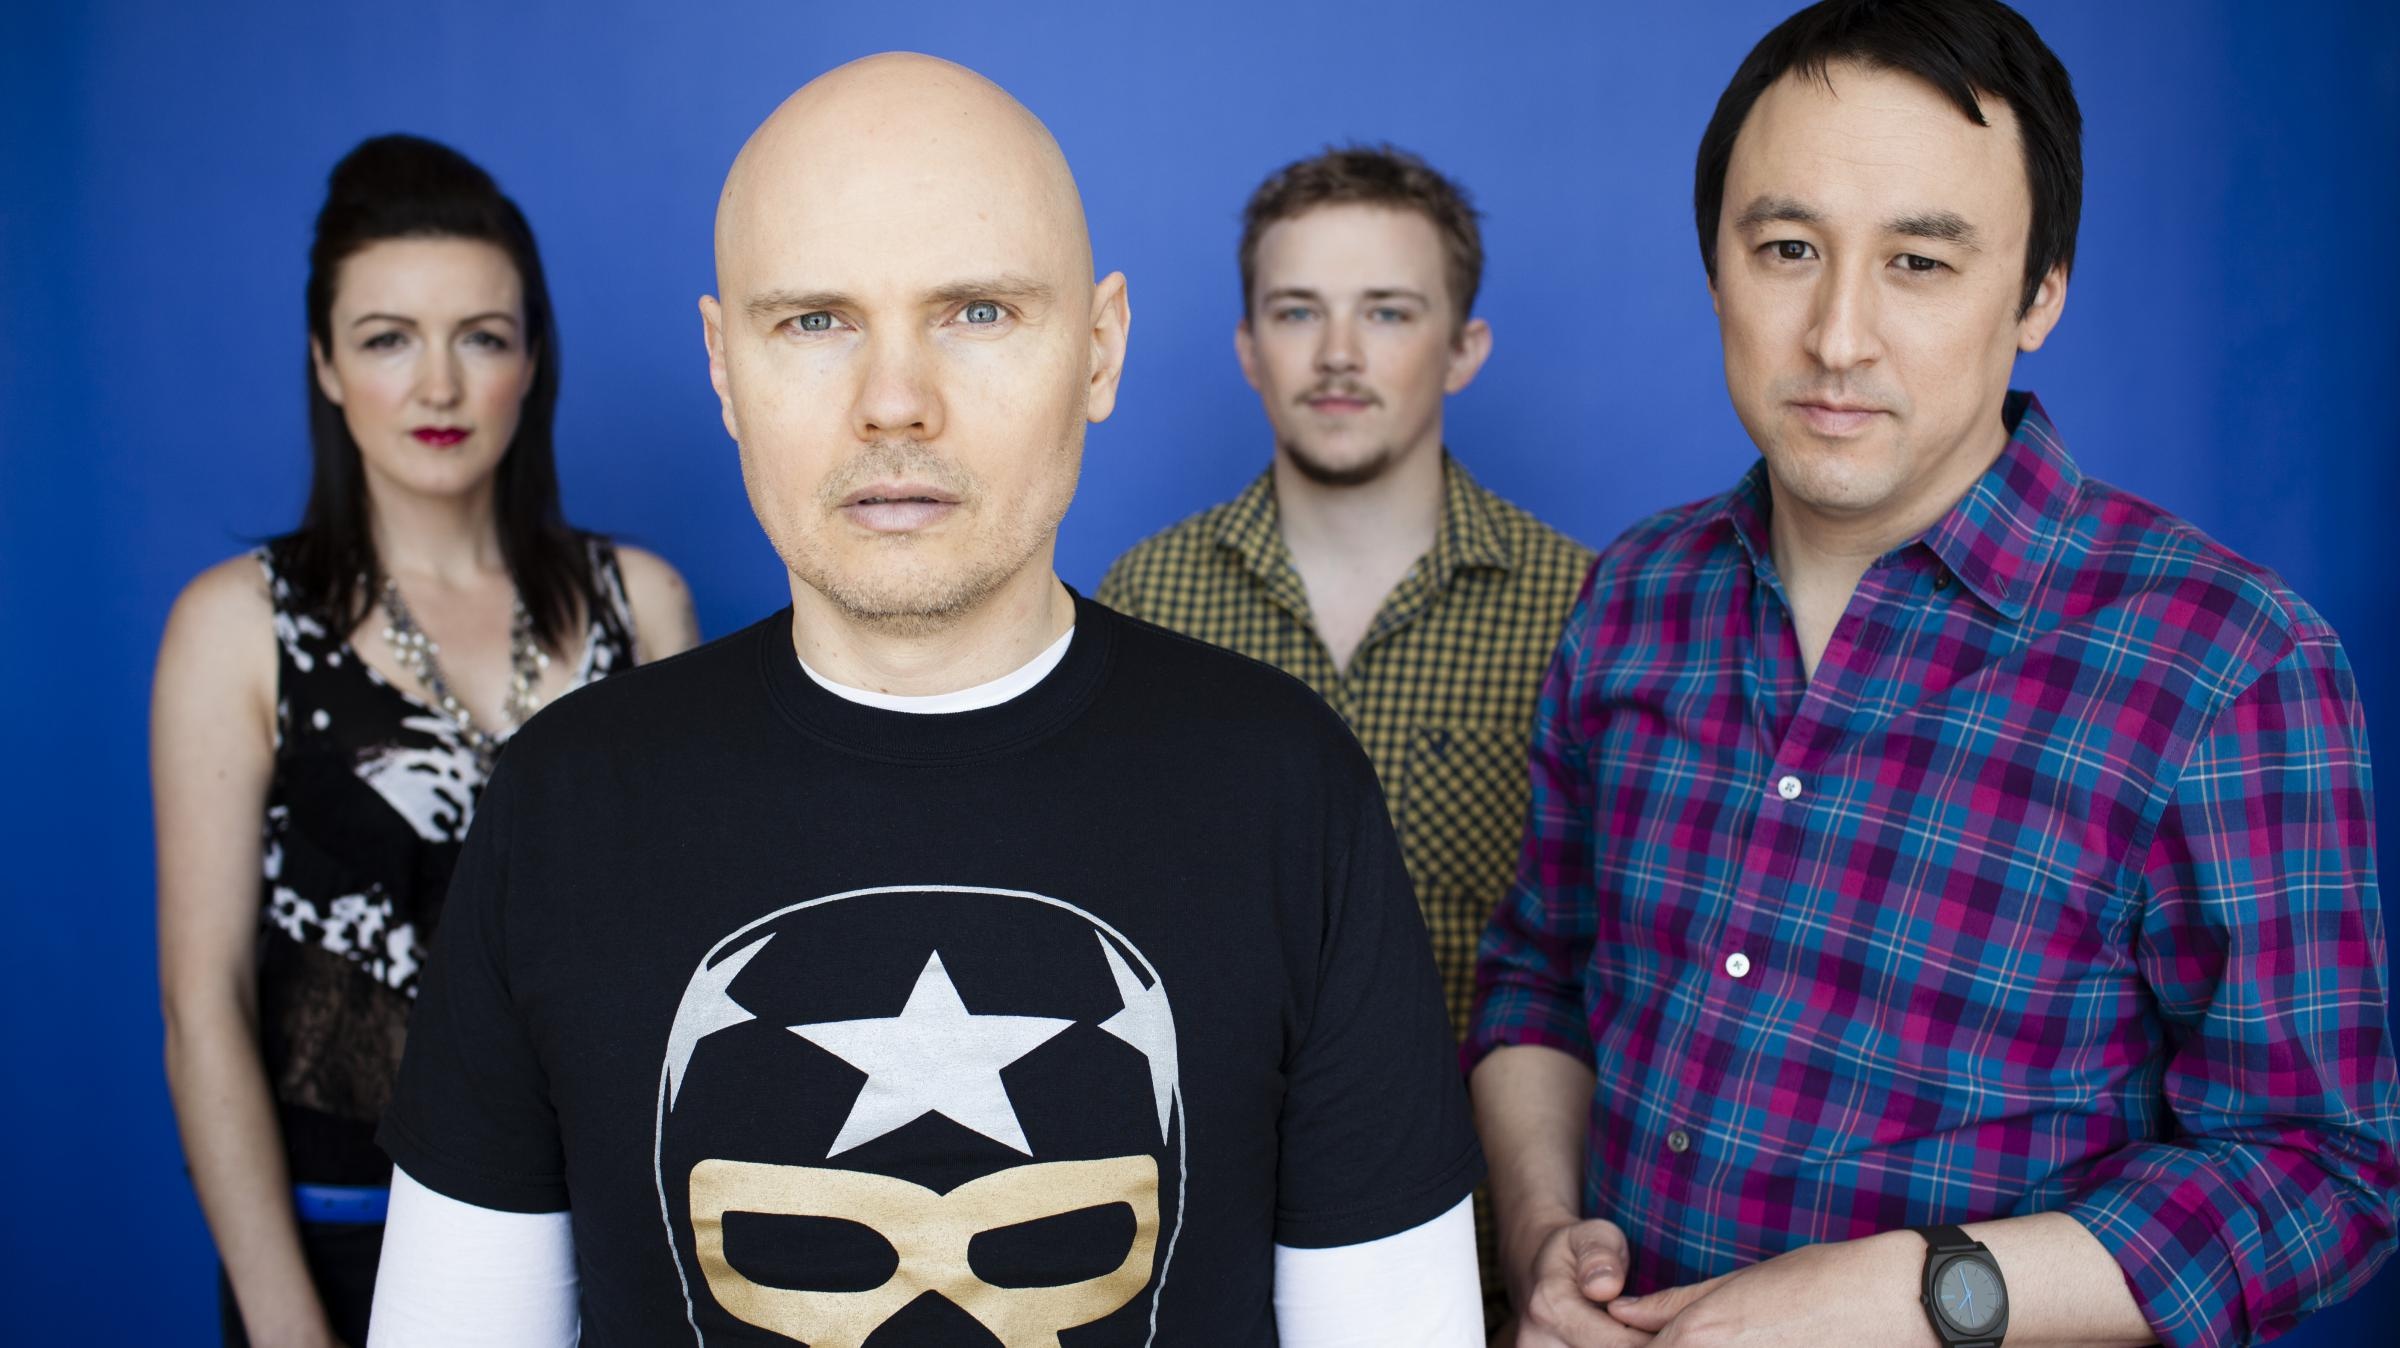 The Smashing Pumpkins, A decade of difference, WNRN's perspective, Reflecting on the band, 2400x1350 HD Desktop